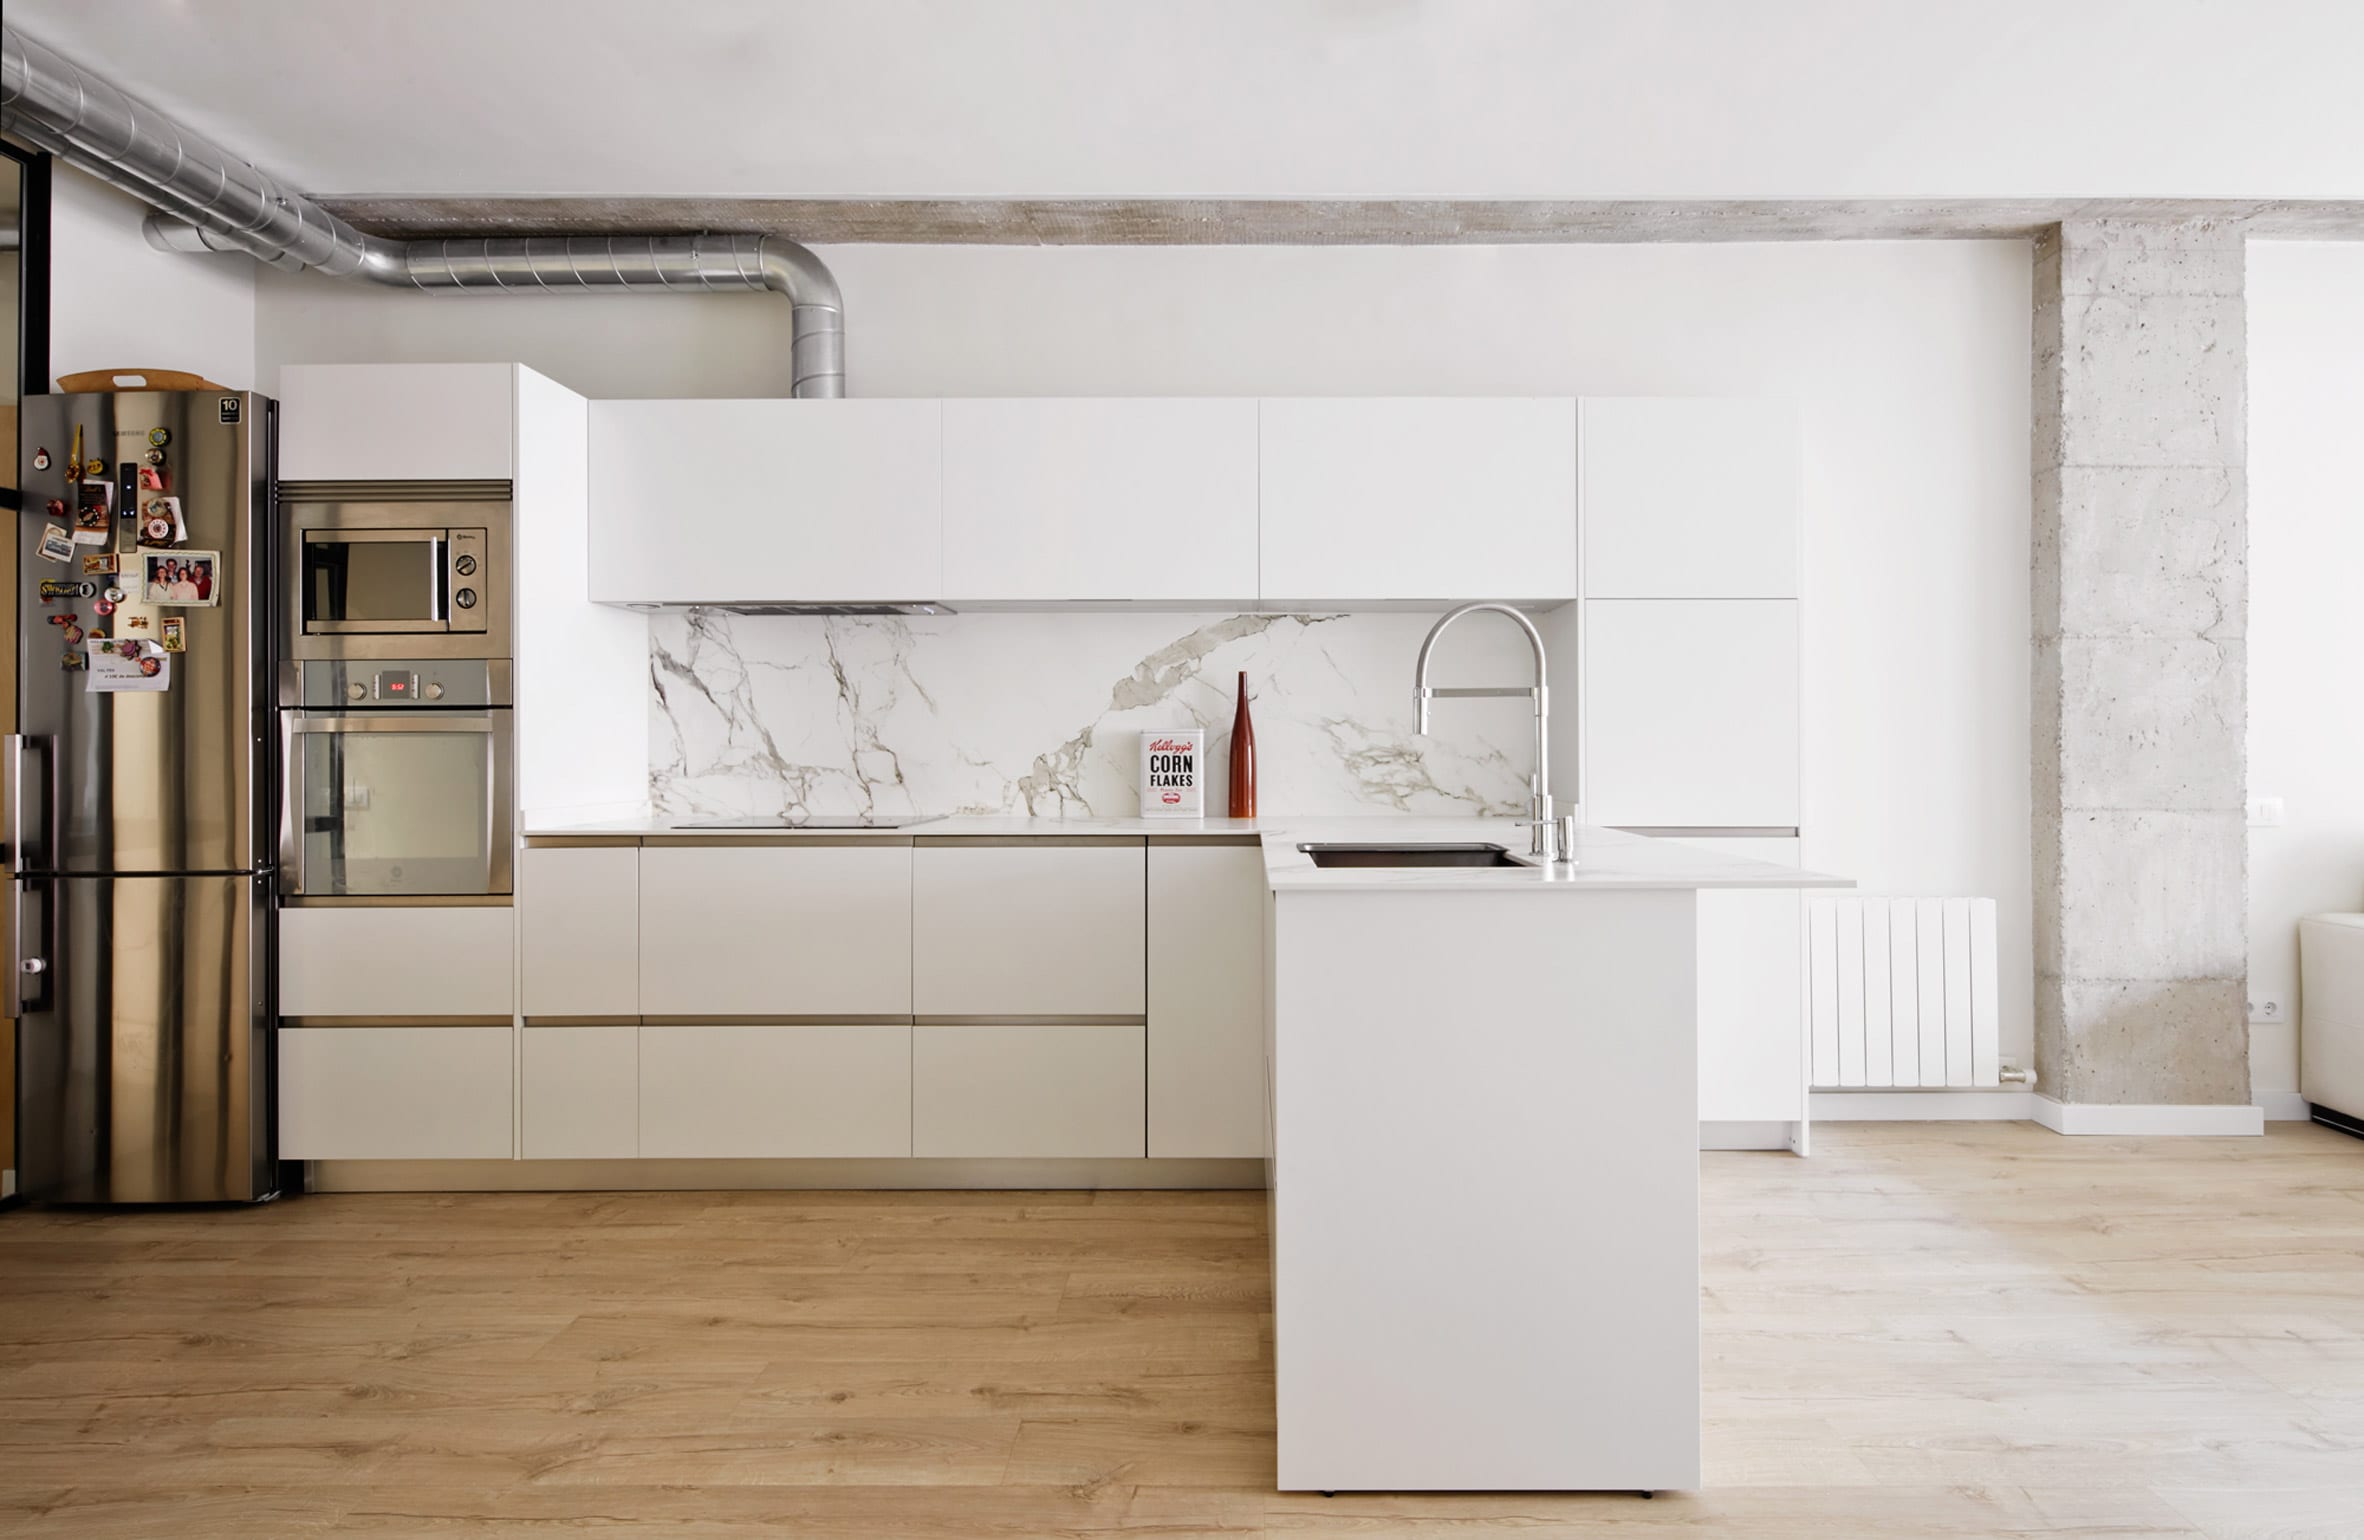 L-shaped kitchen by ras arquitectura